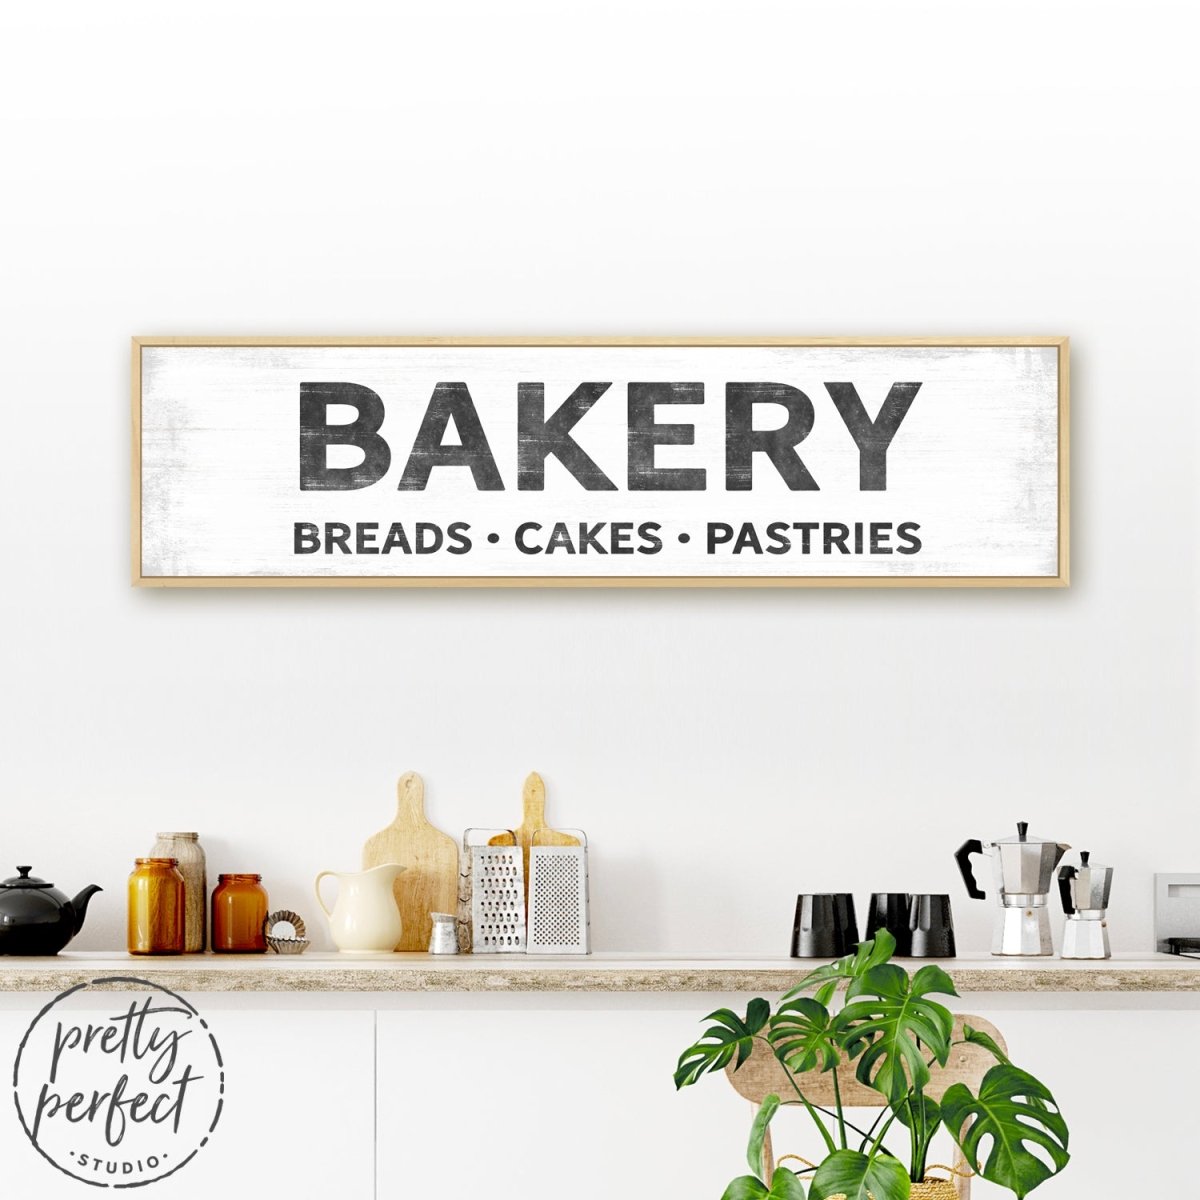 Bakery, Breads, Cakes, Pastries Kitchen Sign in Kitchen - Pretty Perfect Studio